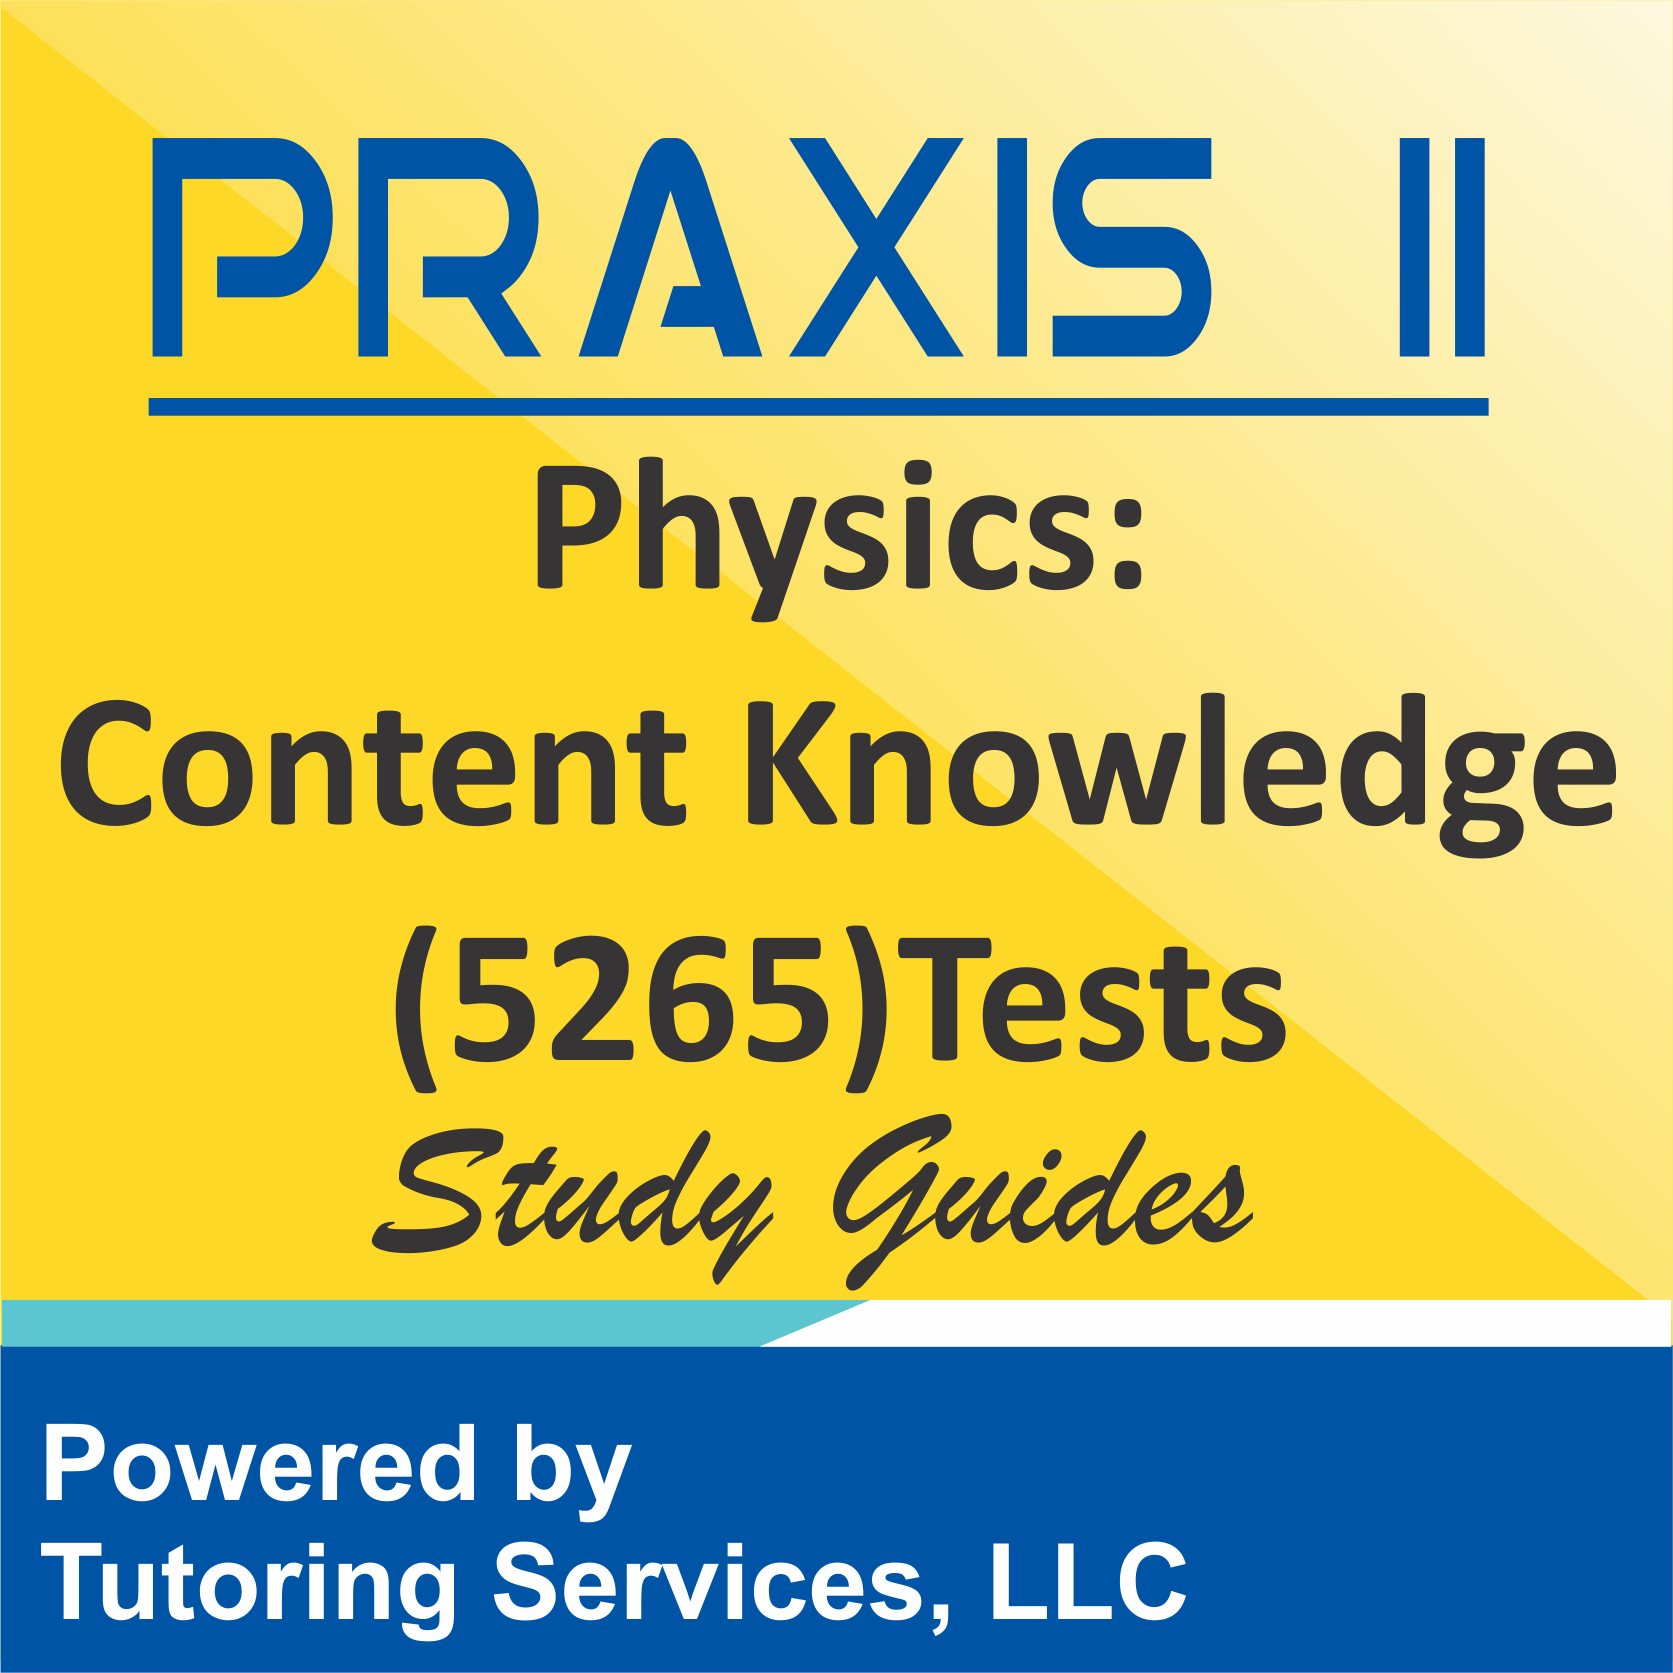 Praxis II Physics: Content Knowledge (5265) Test Guidelines